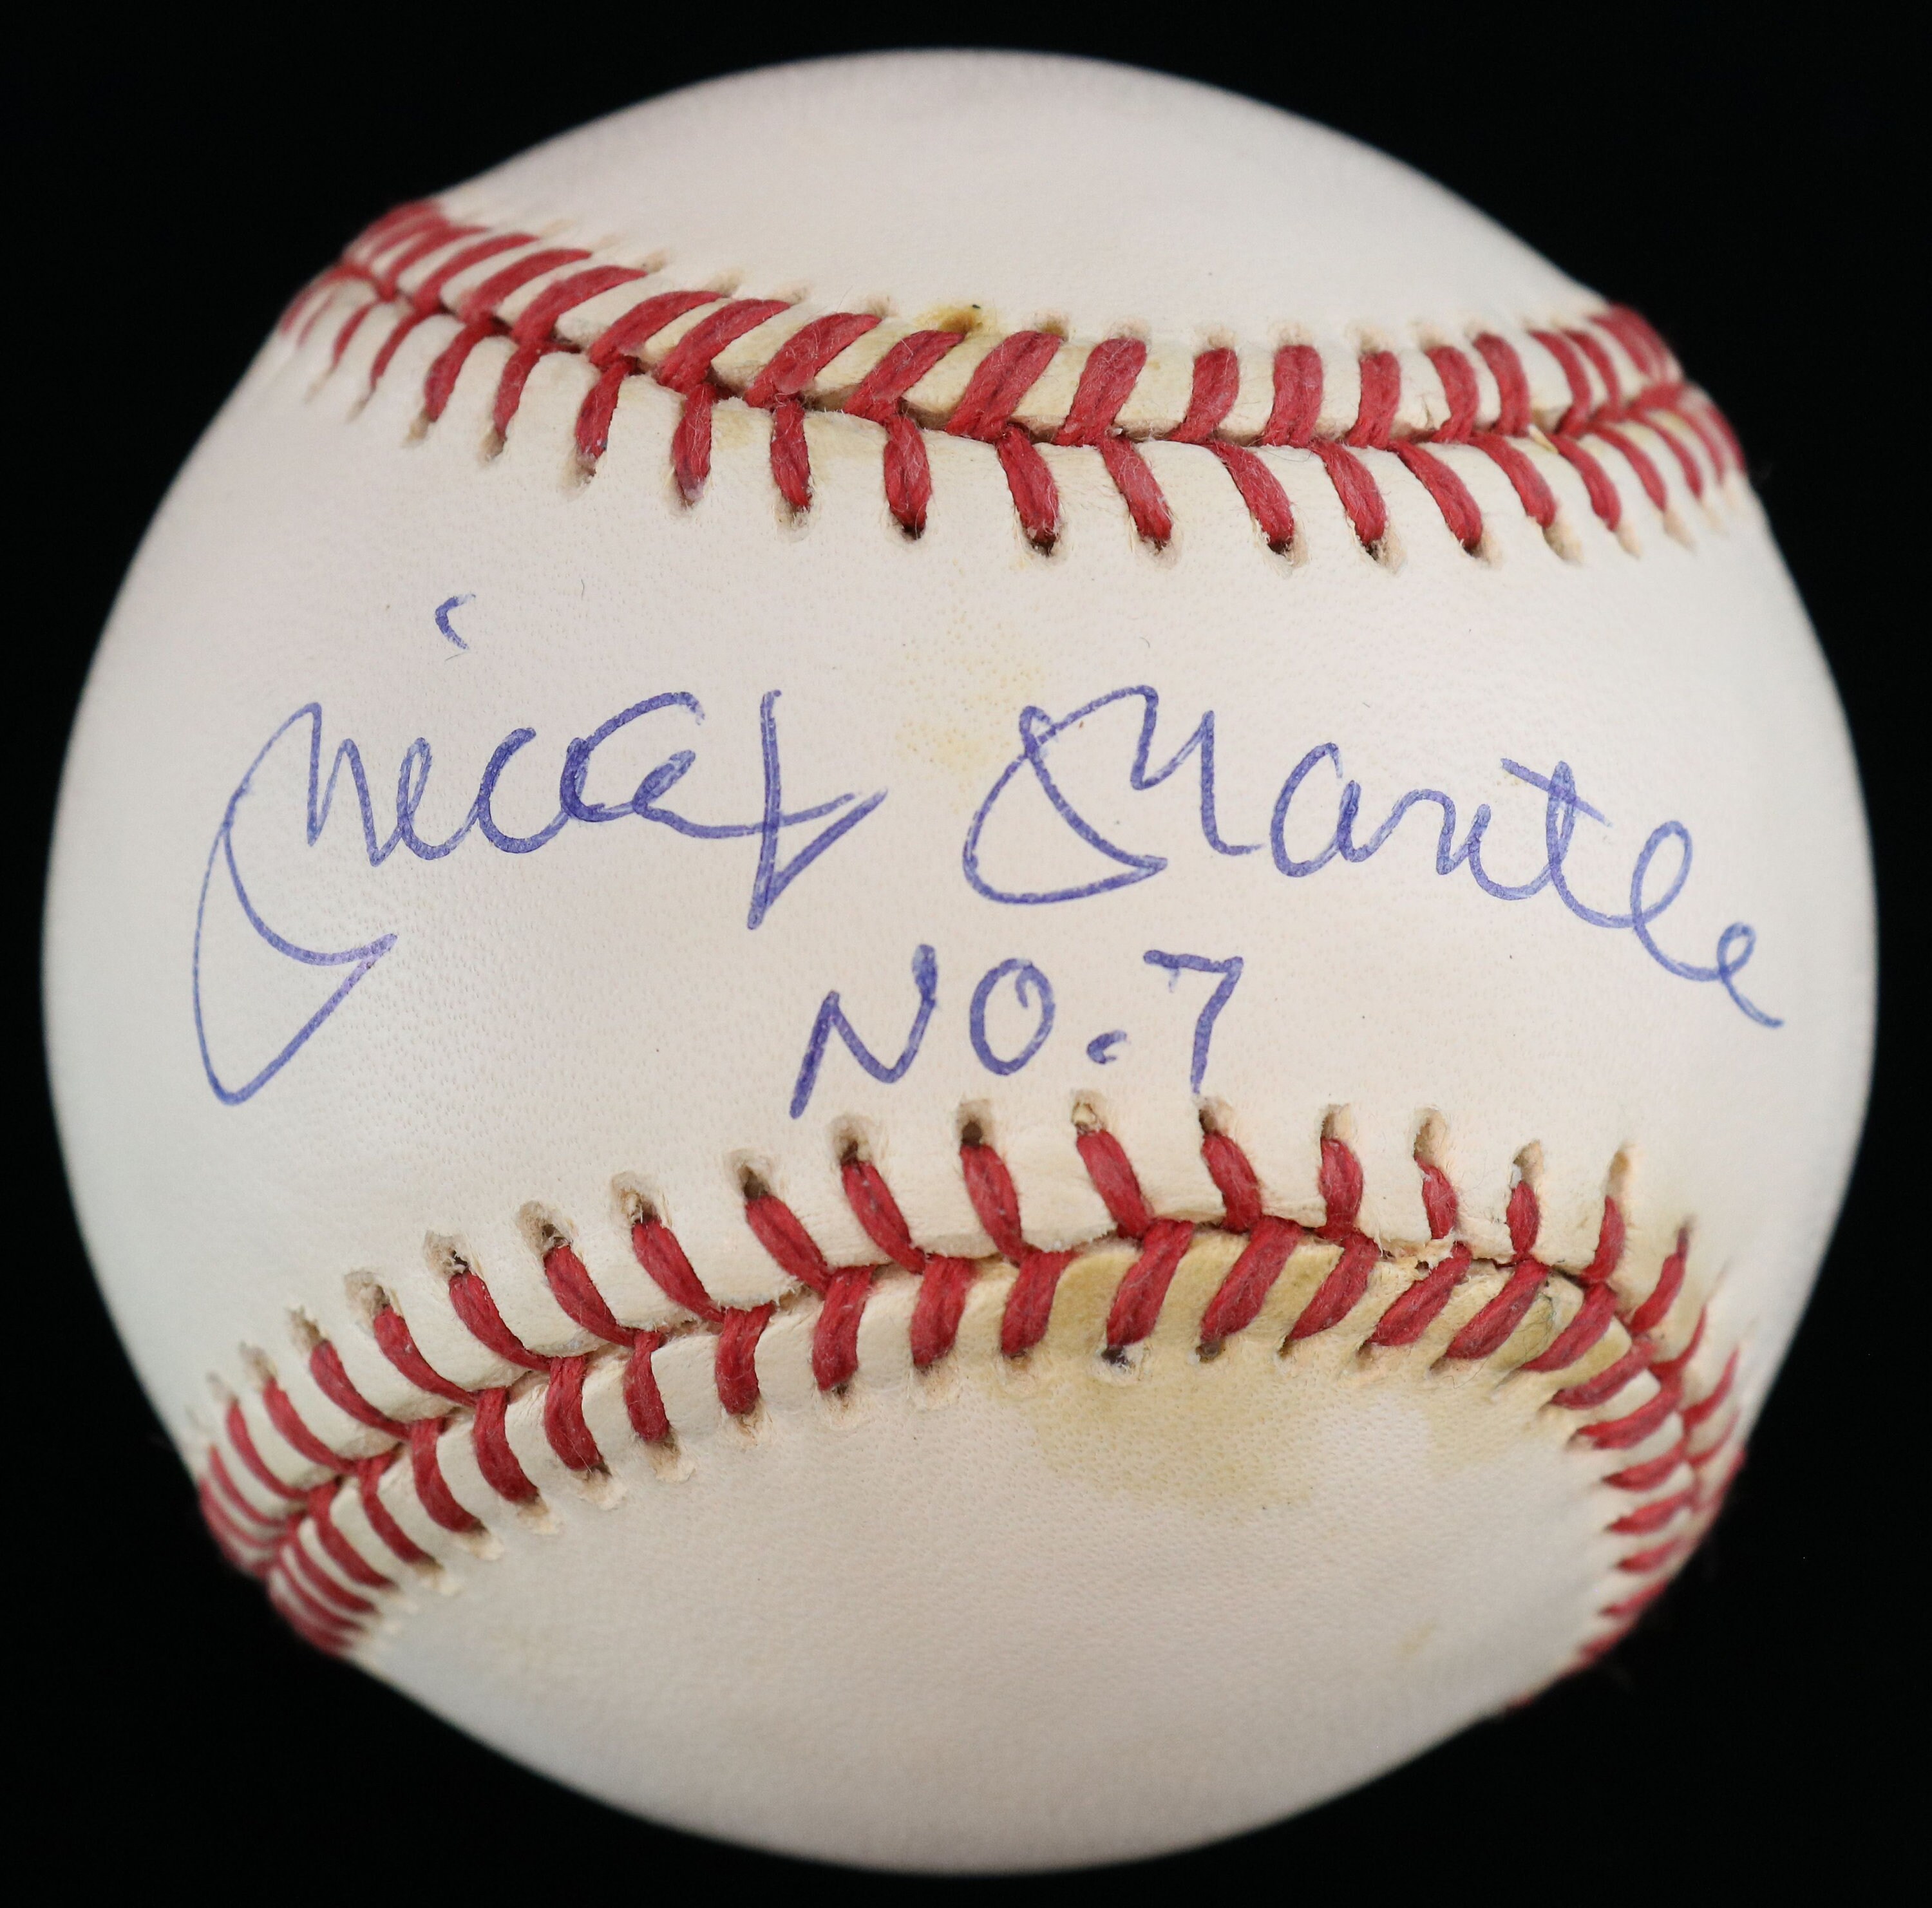 Incredible Mickey Mantle No. 6 Signed Inscribed NY Yankees Rookie